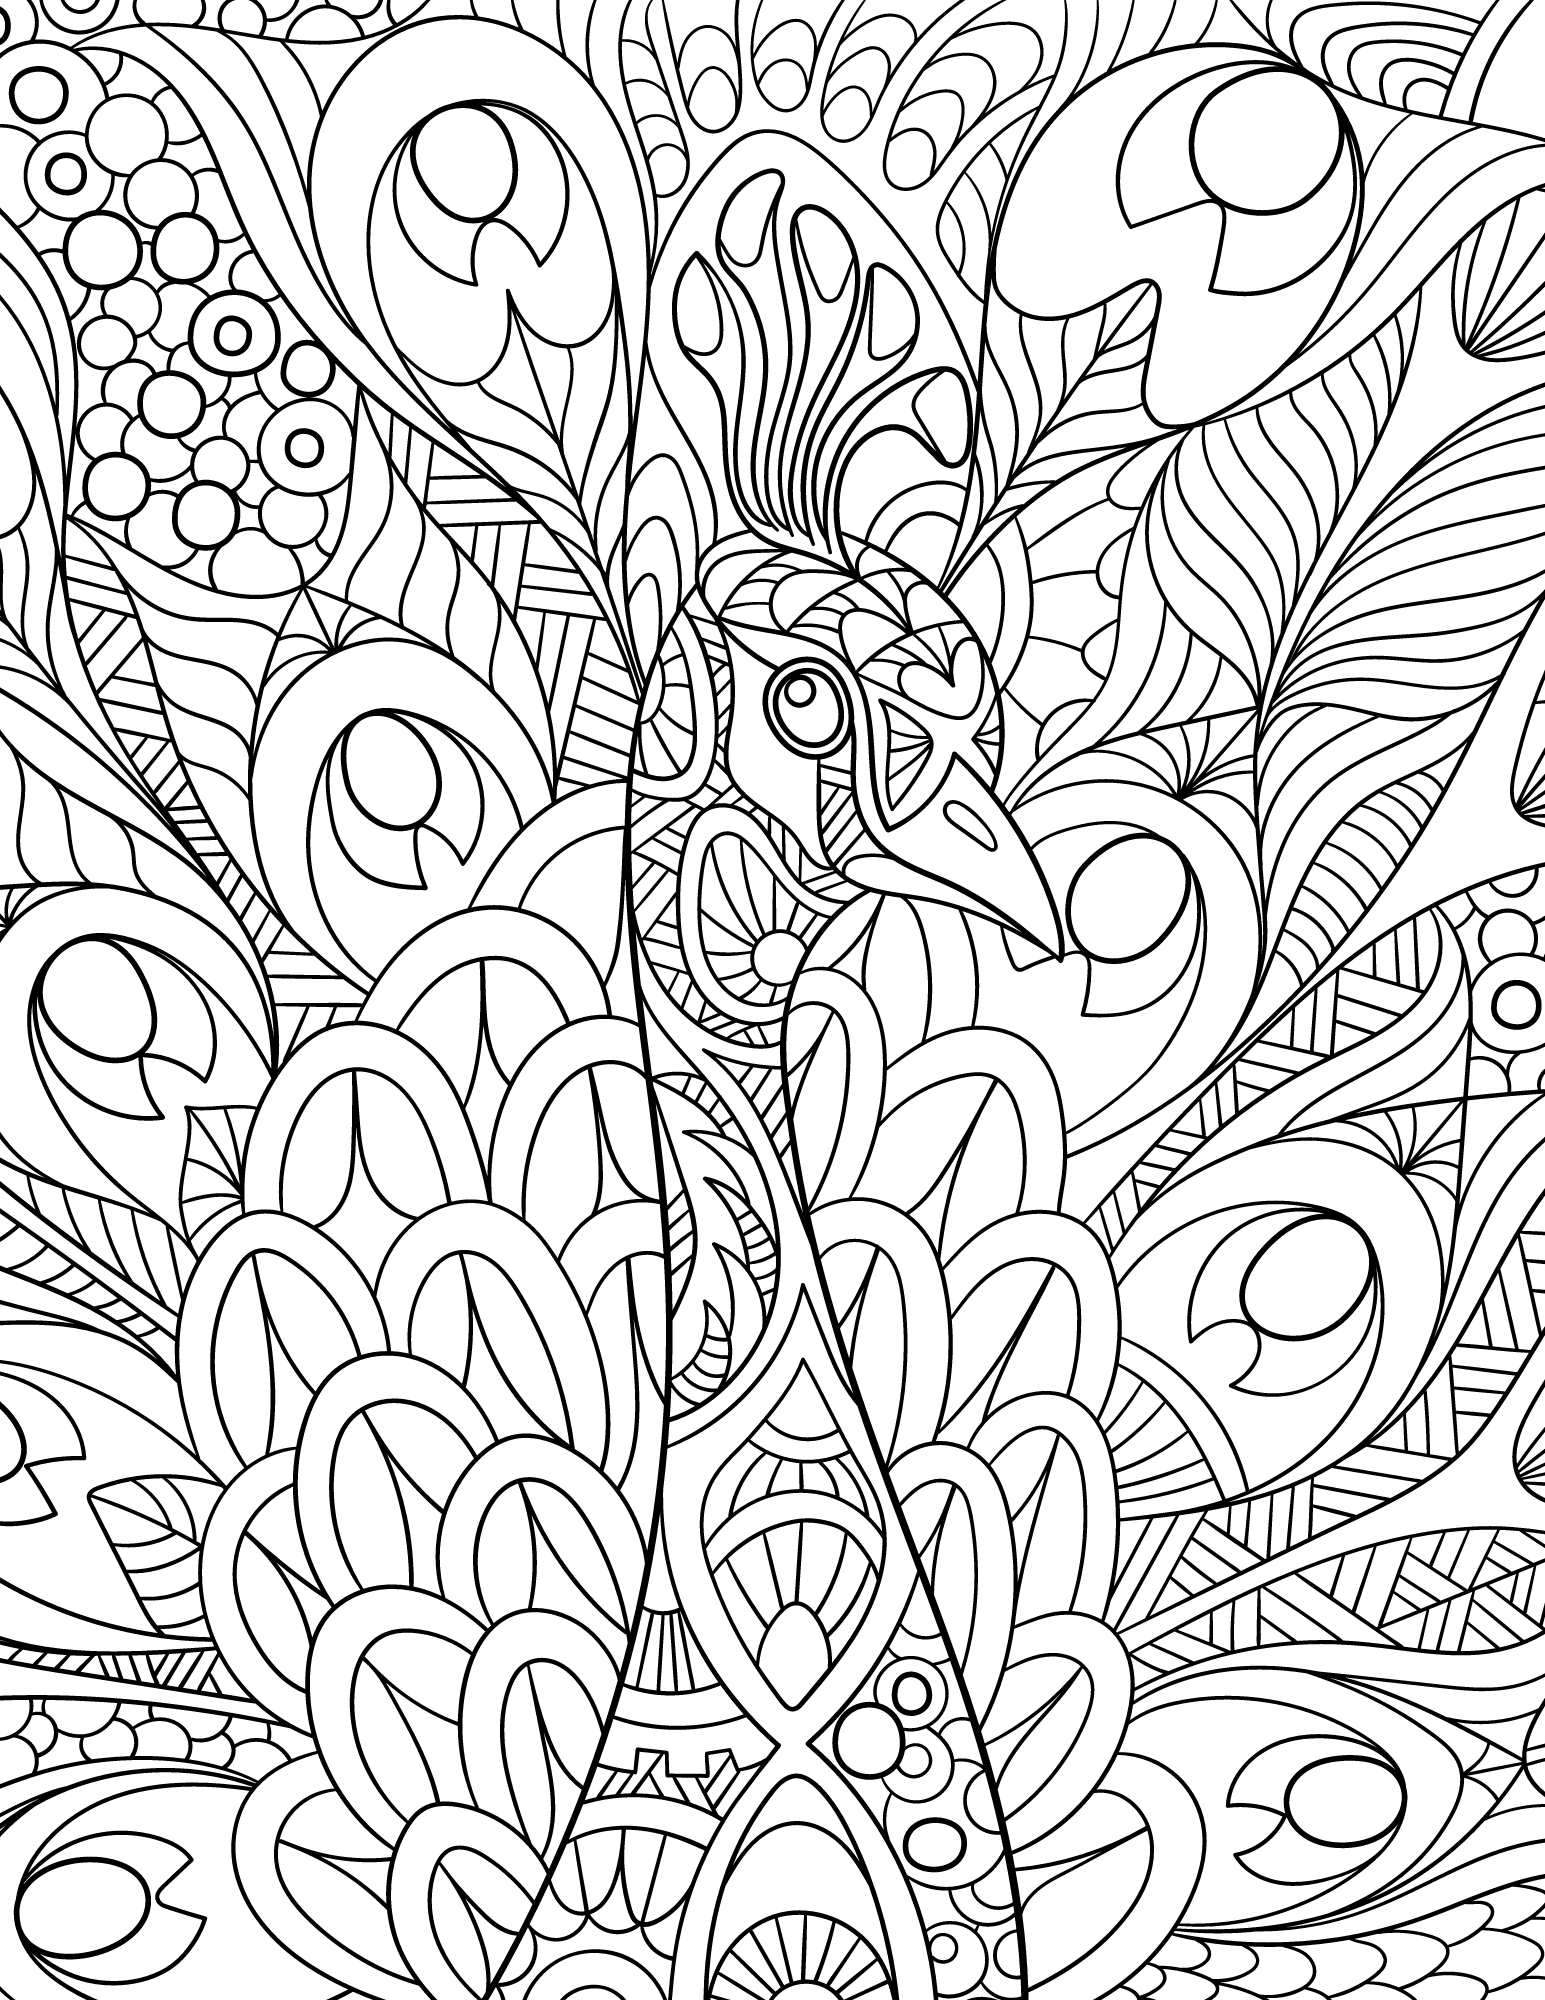 Perfect peacock coloring pages for kids and adults